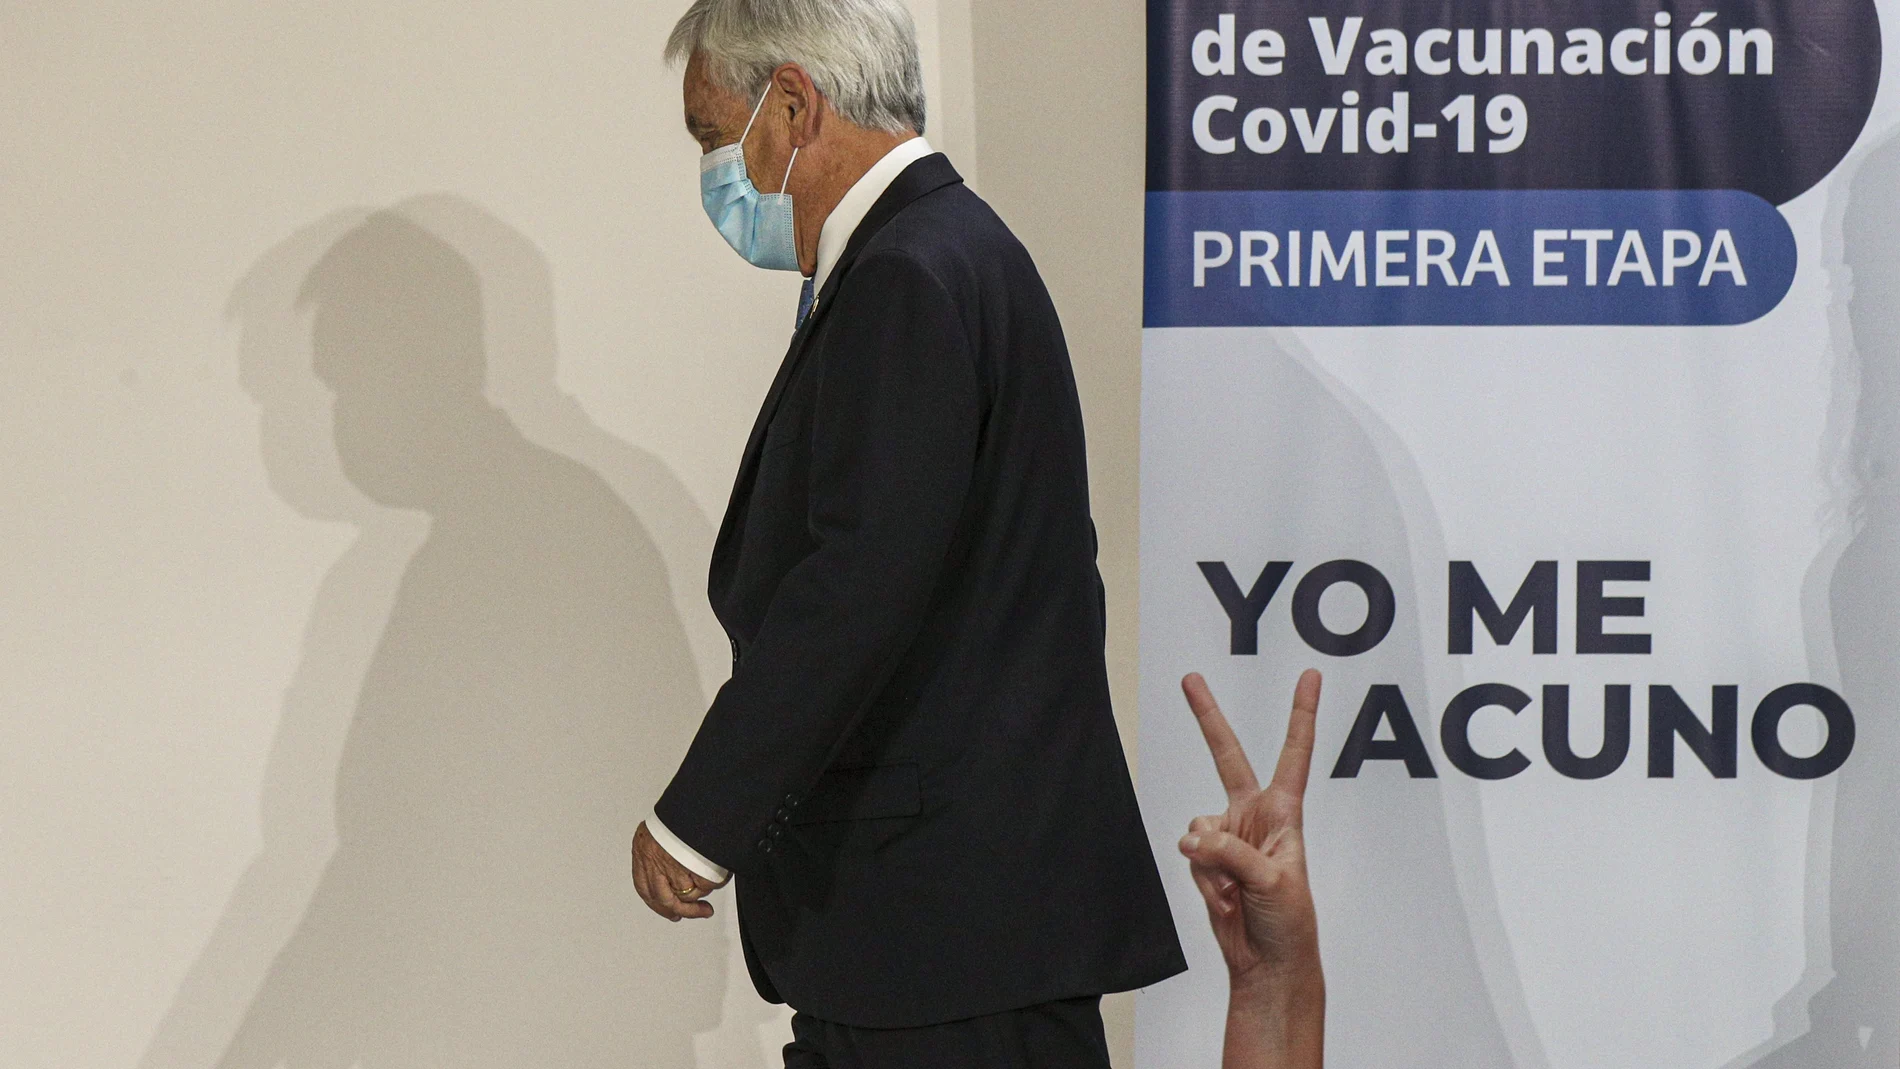 FILE - In this Dec. 24, 2020, file photo, Chilean President Sebastian Pinera walks away after observing the first vaccination shots for COVID-19 at the Metropolitan Hospital in Santiago, Chile. World leaders, including Pinera, are condemning the storming of the U.S. Capitol by supporters of President Donald Trump. (AP Photo/Esteban Felix, File)